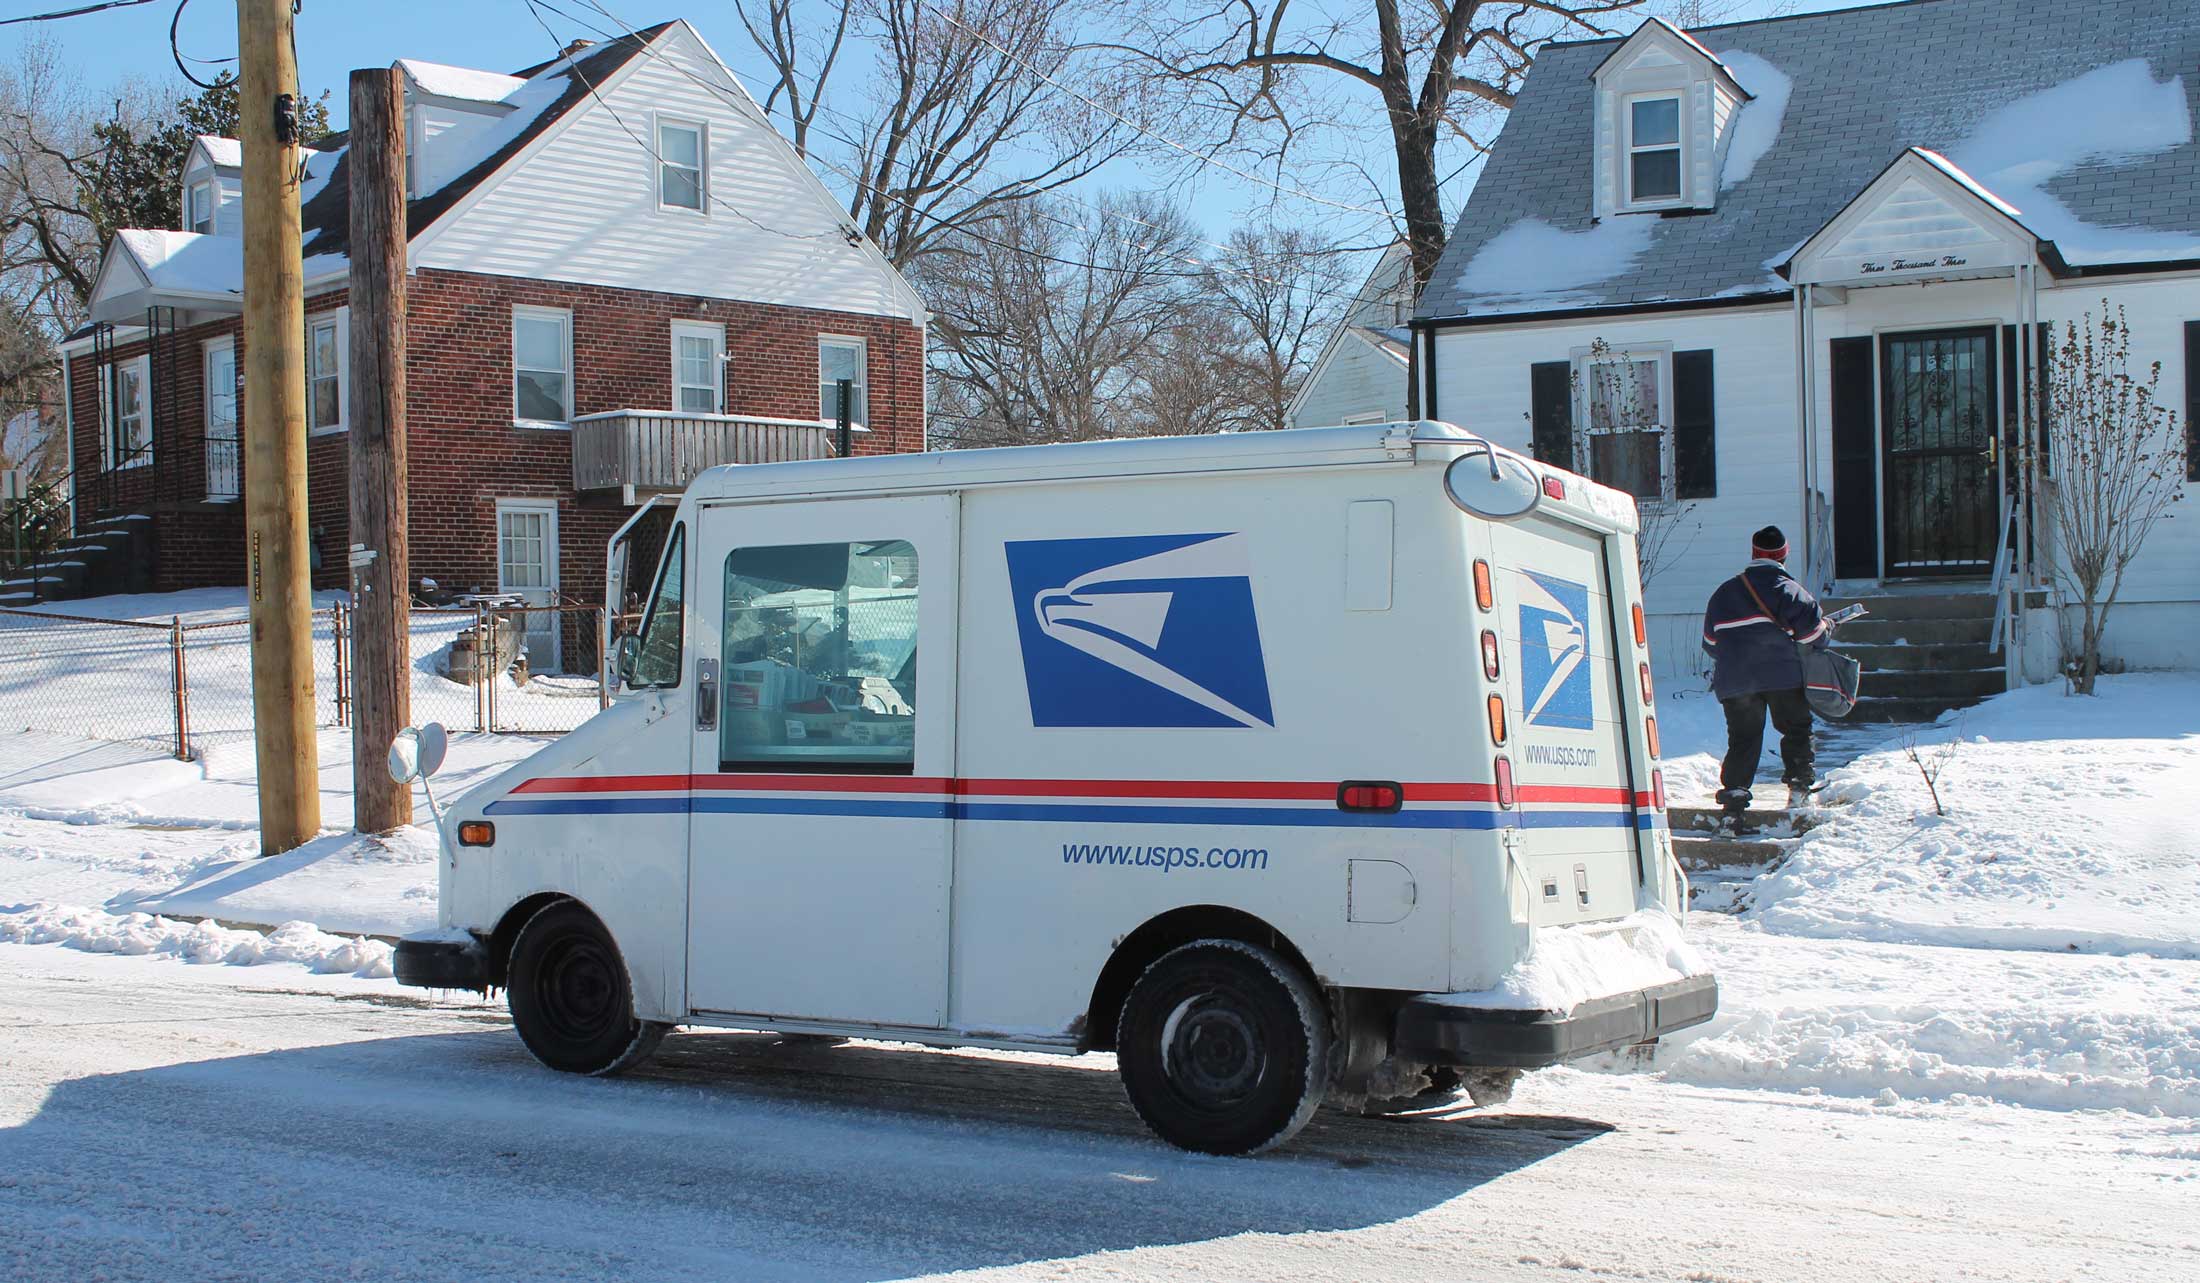 Mailman and Mail Truck in Winter